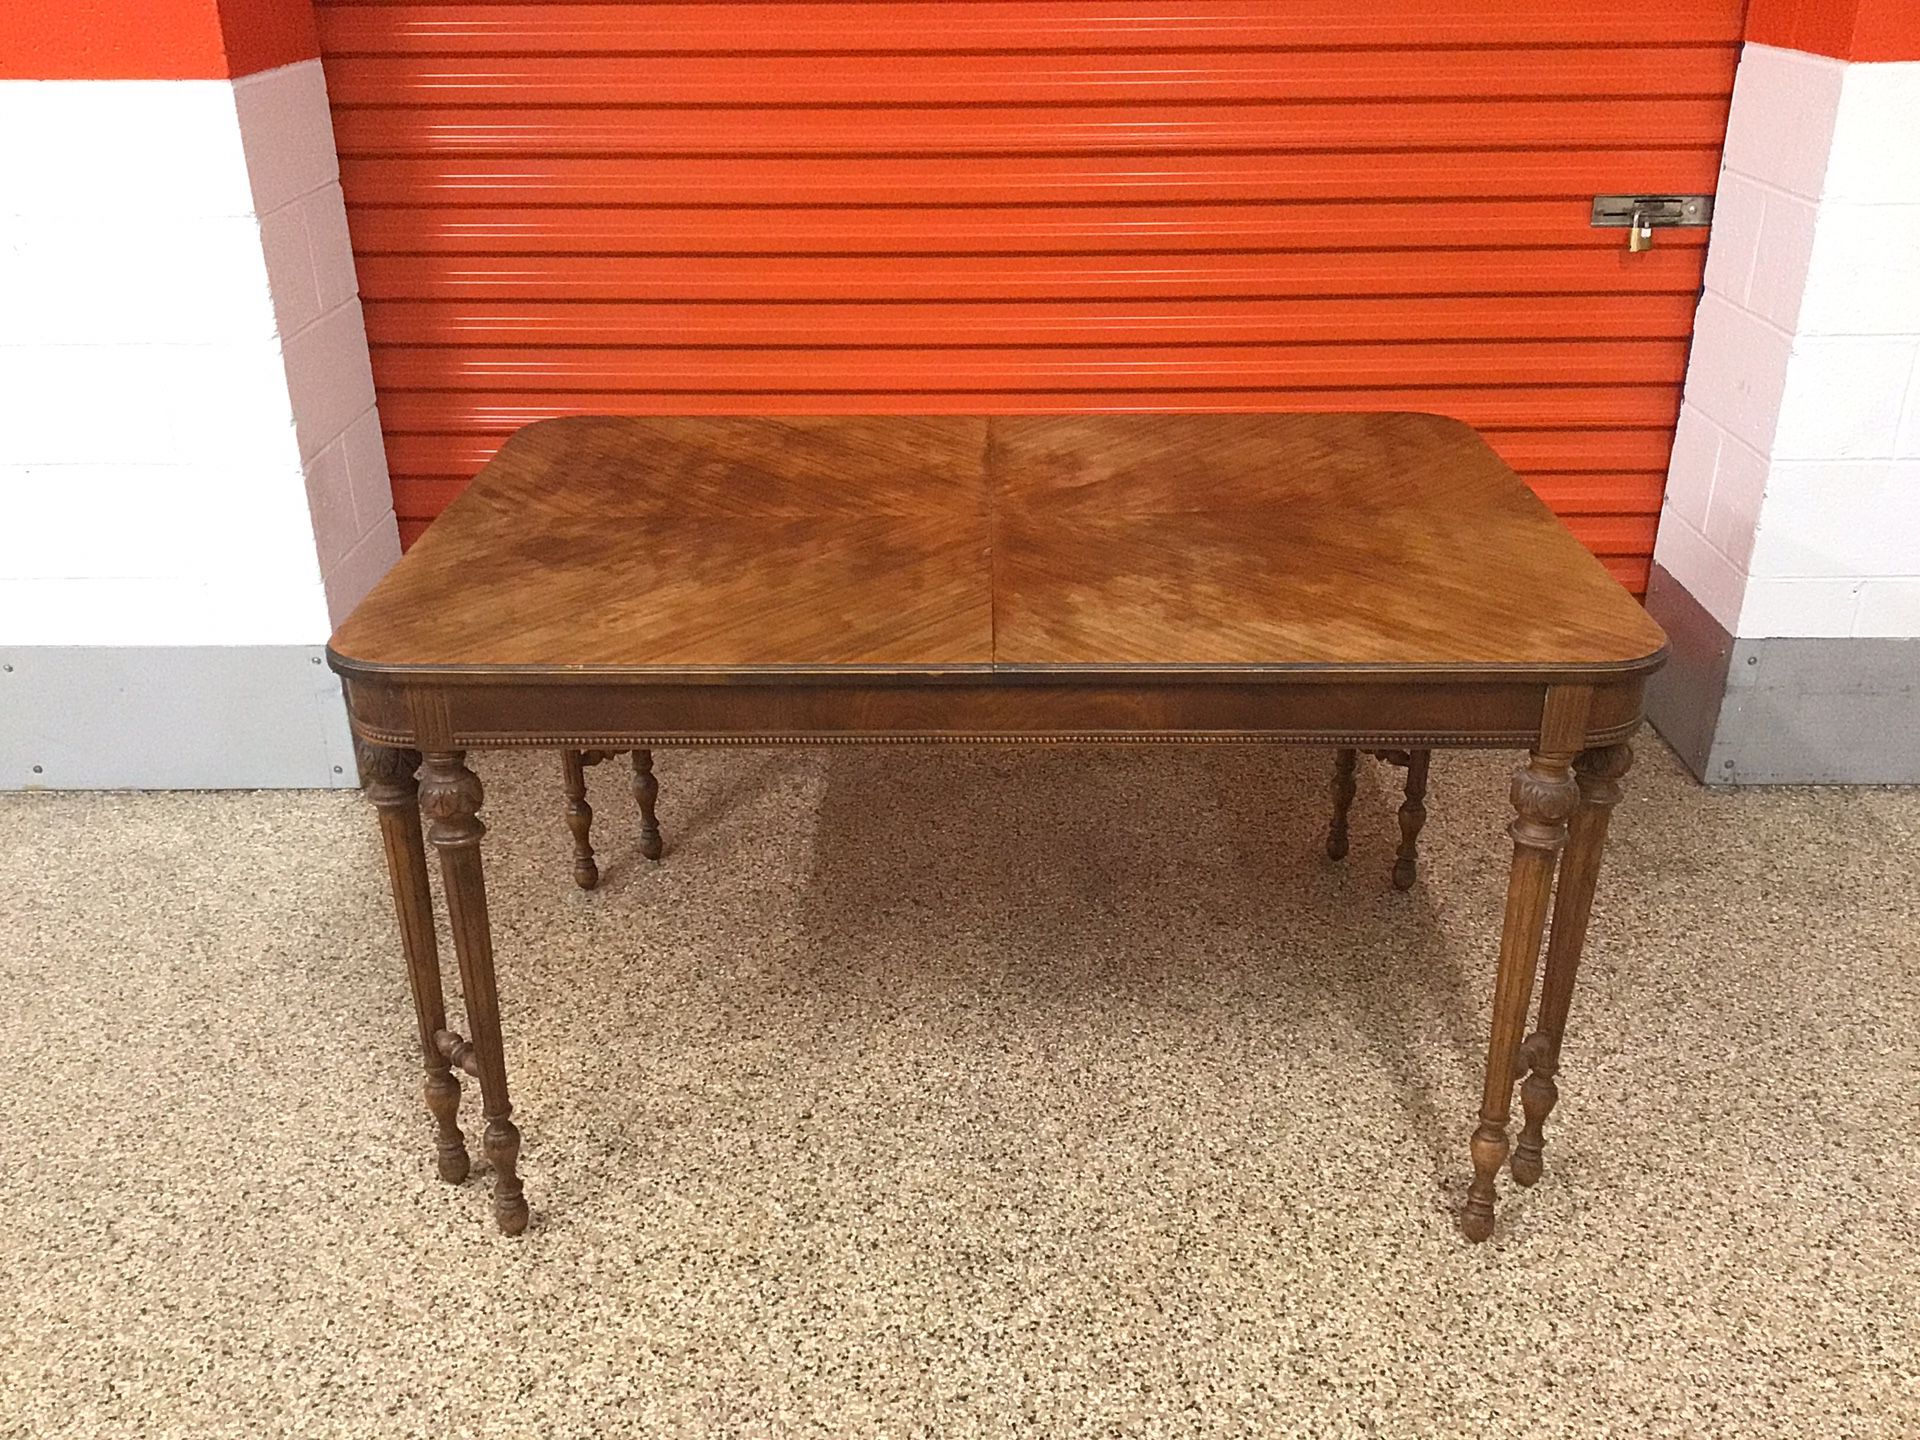 Vintage Wood Dining Table - Will Deliver